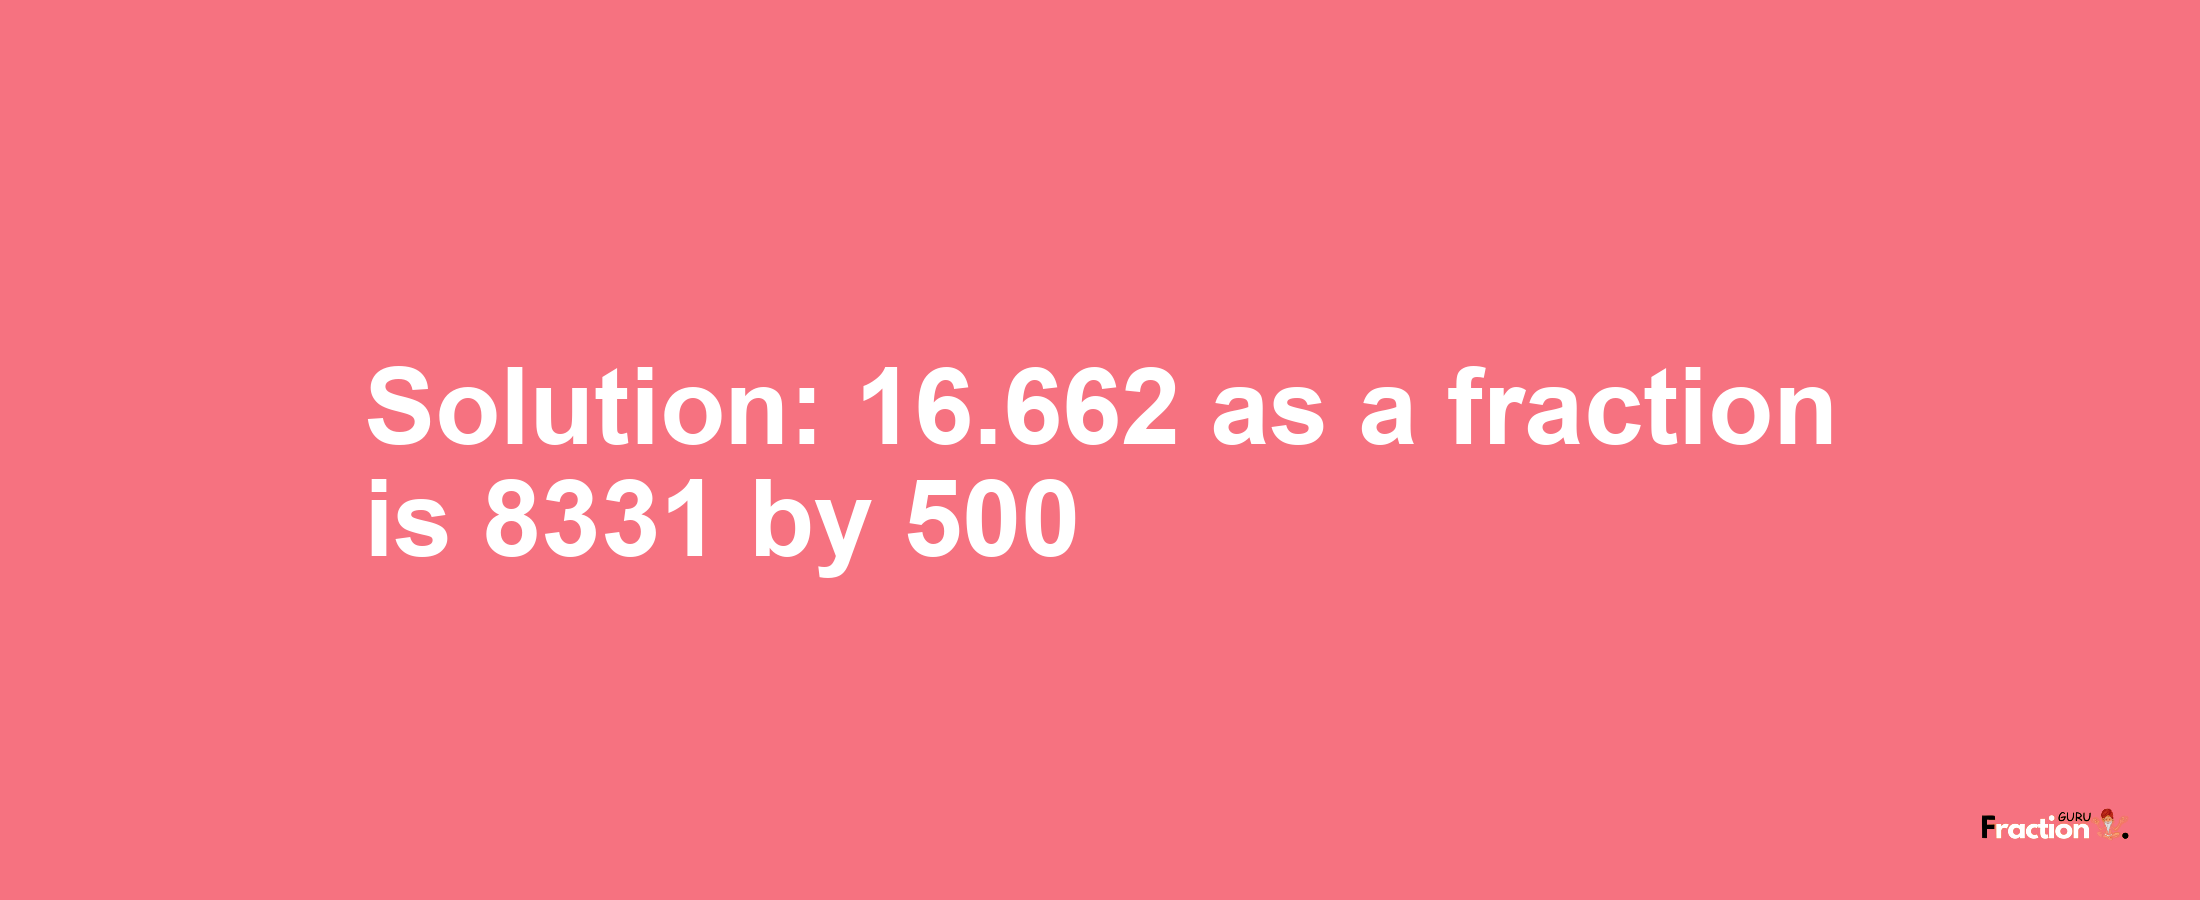 Solution:16.662 as a fraction is 8331/500